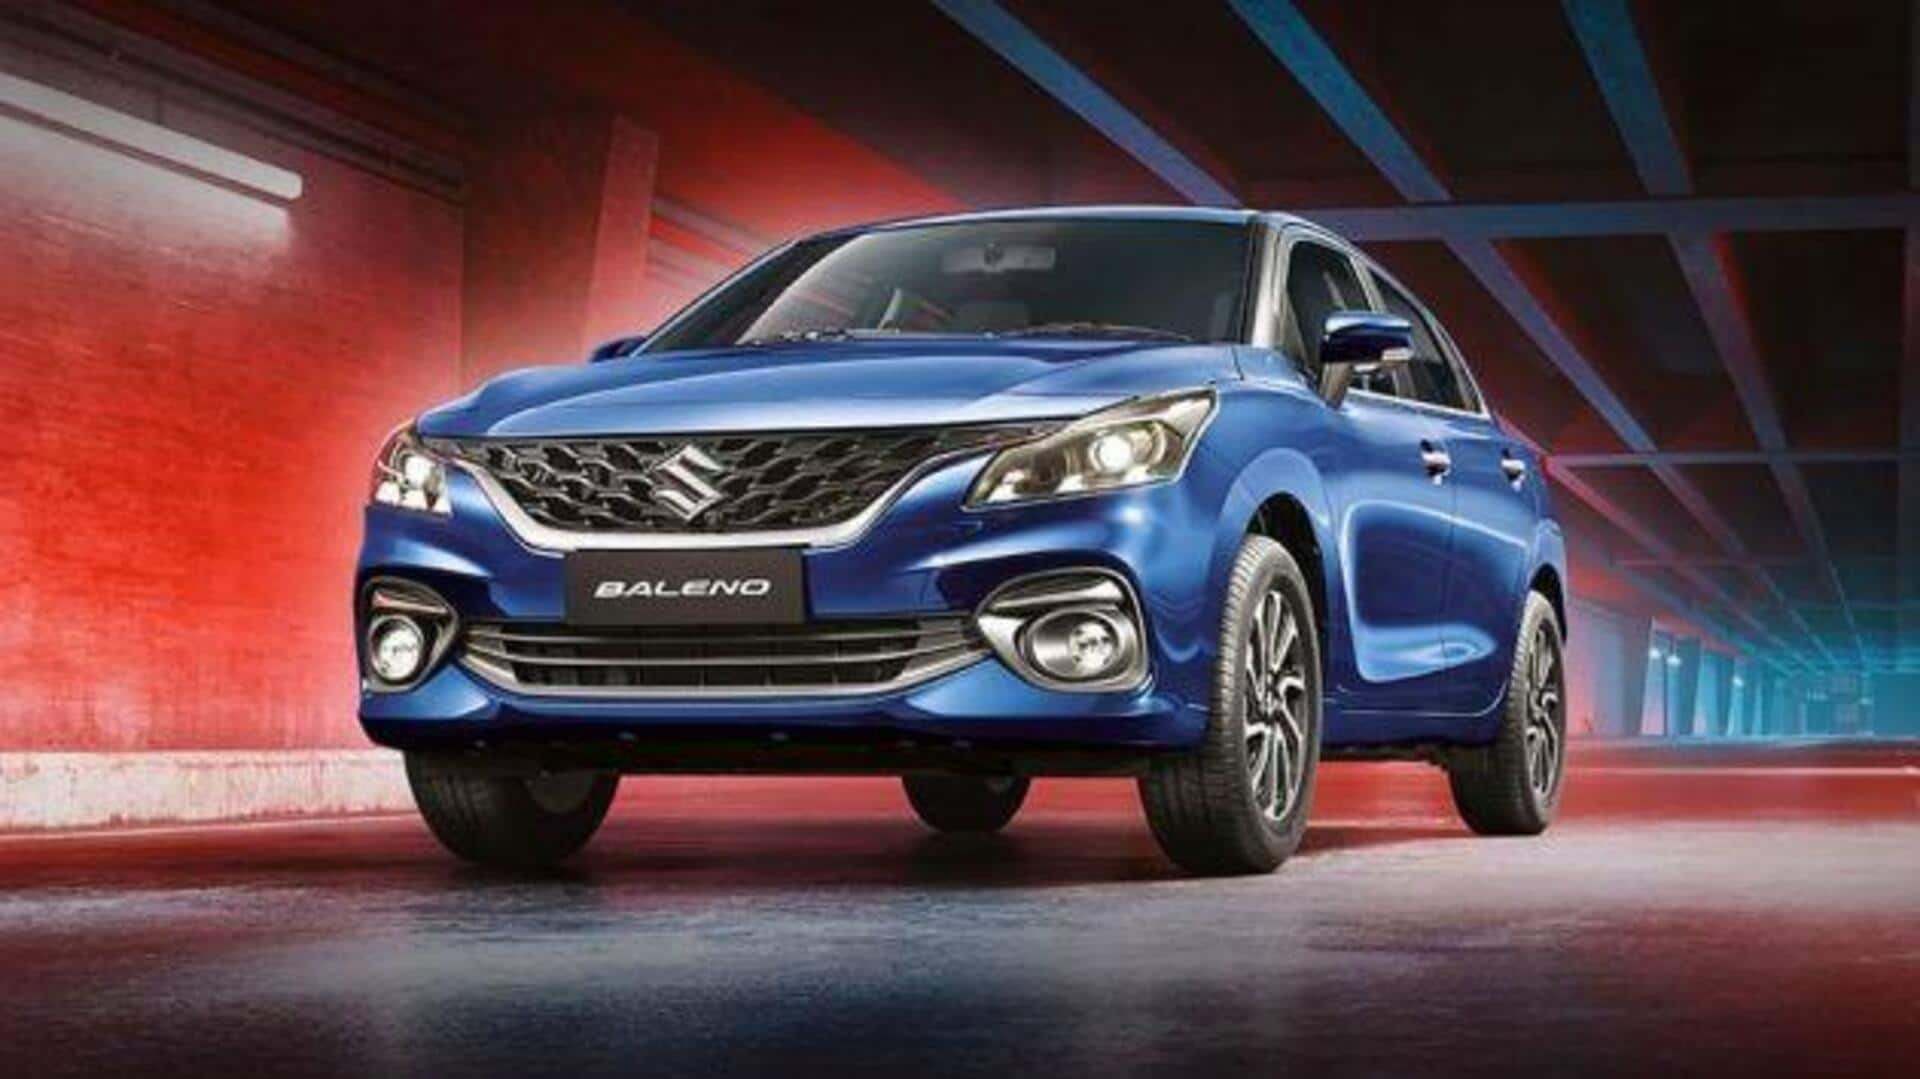 Maruti Suzuki to develop cost-effective hybrid technology for compact cars